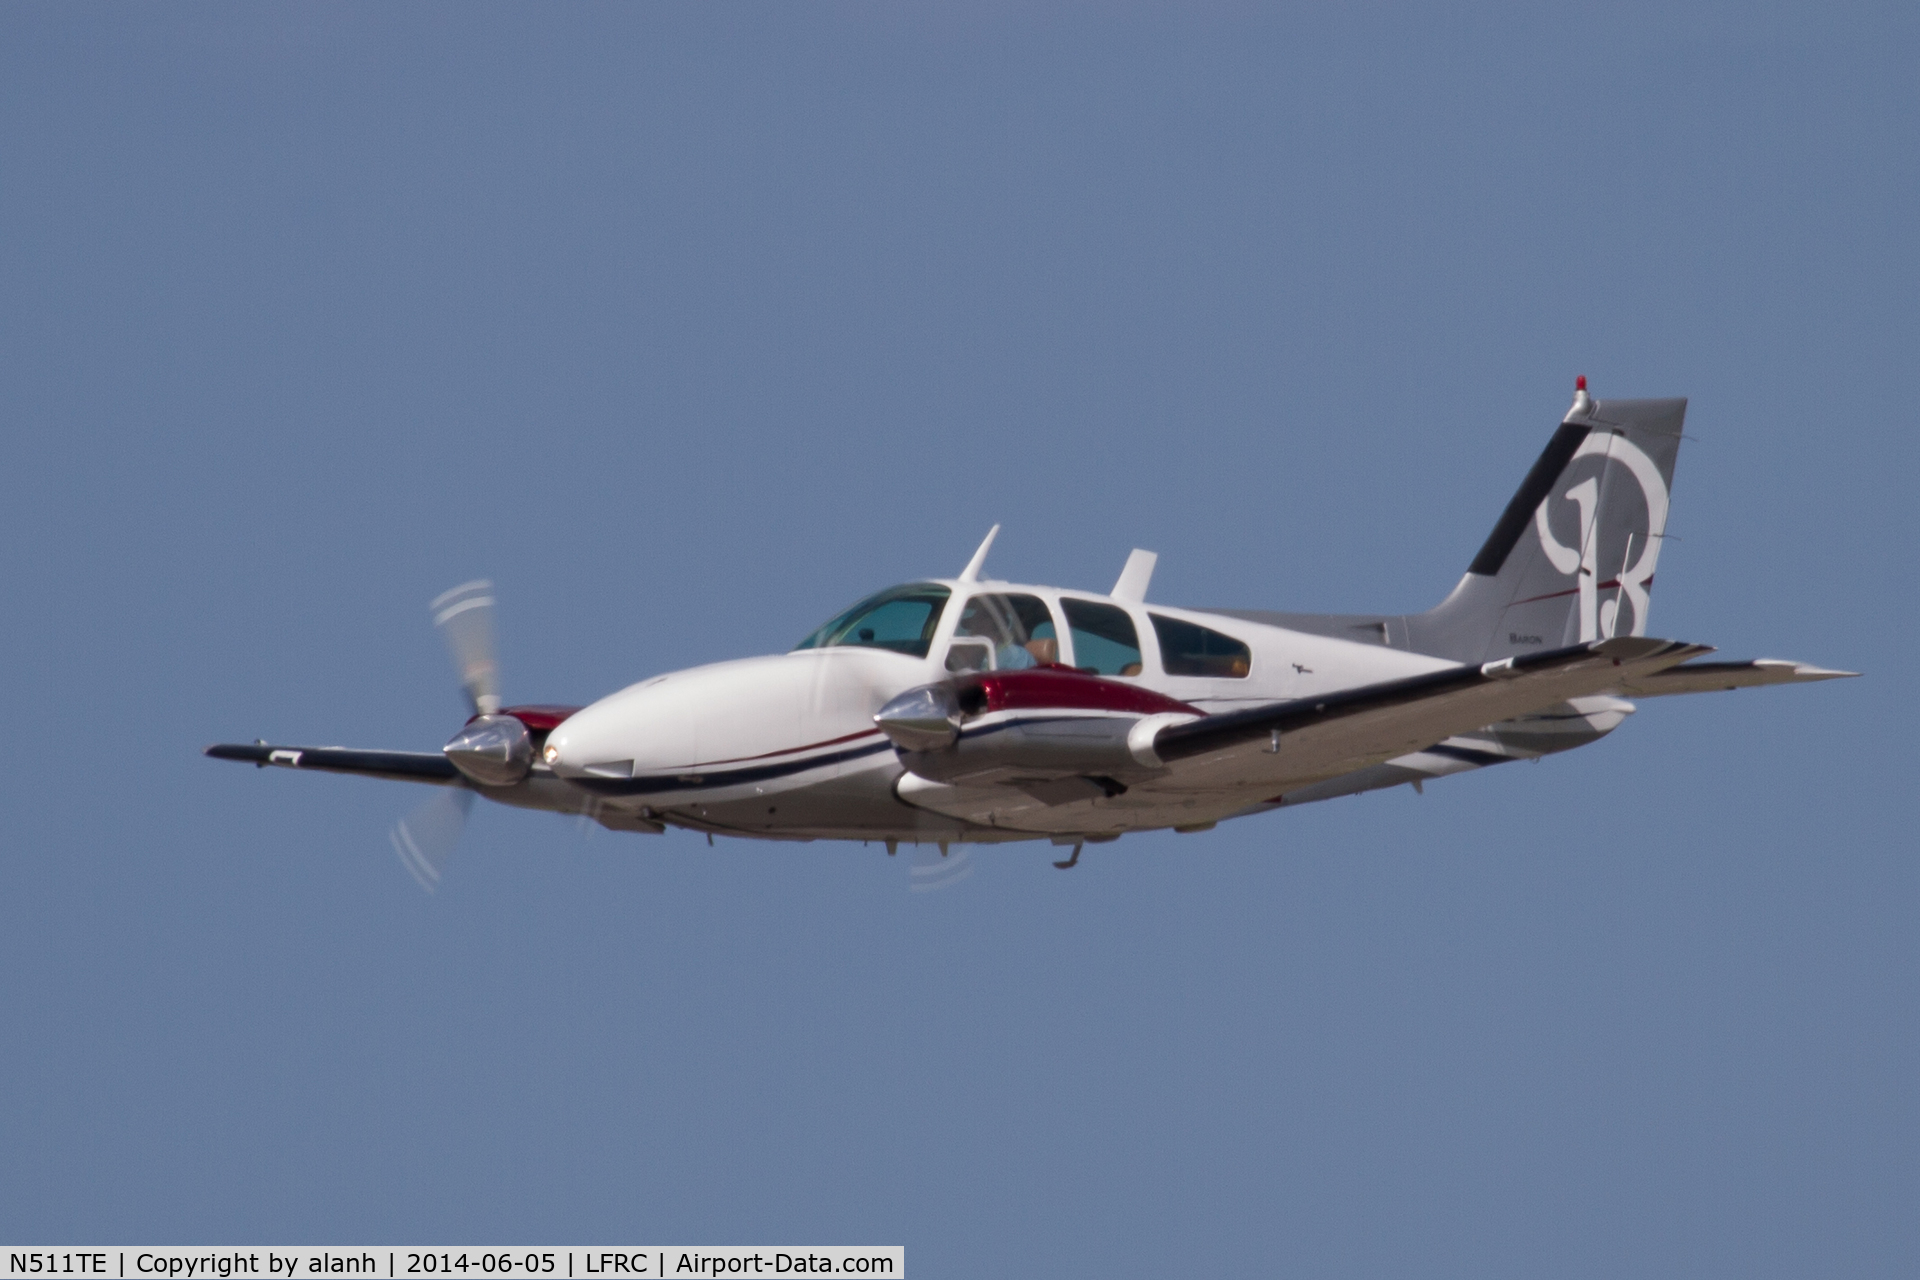 N511TE, Beech D55 Baron C/N TE511, Departing Cherbourg Maupertus during the 2014 Daks Over Normandy event